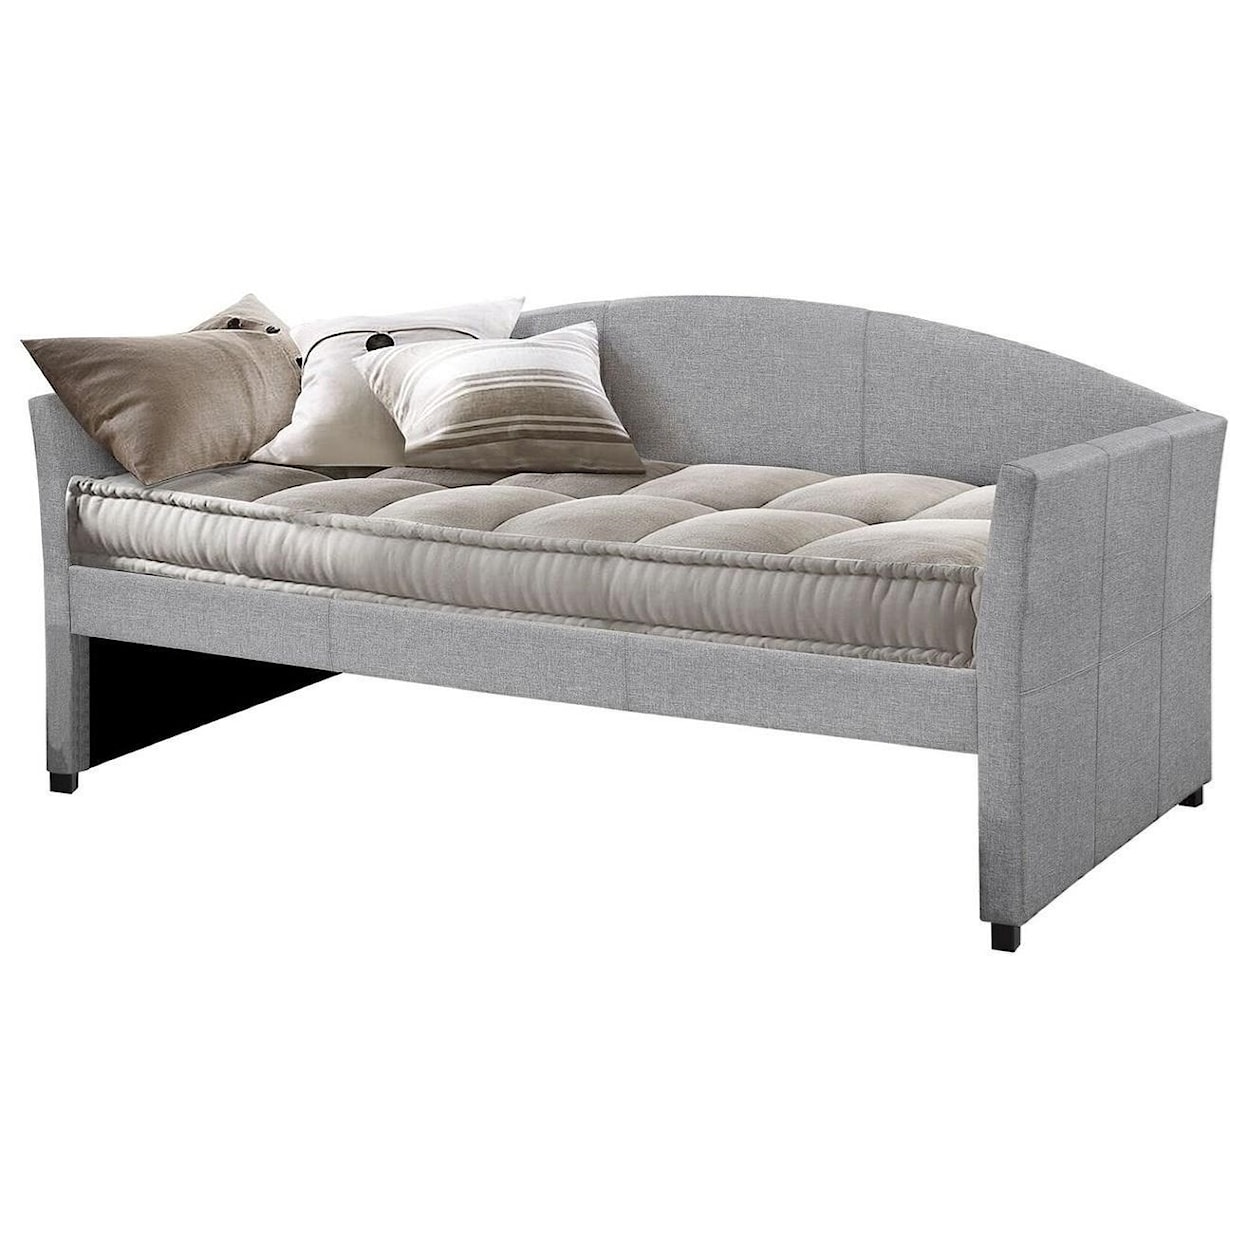 Hillsdale Daybeds Daybed